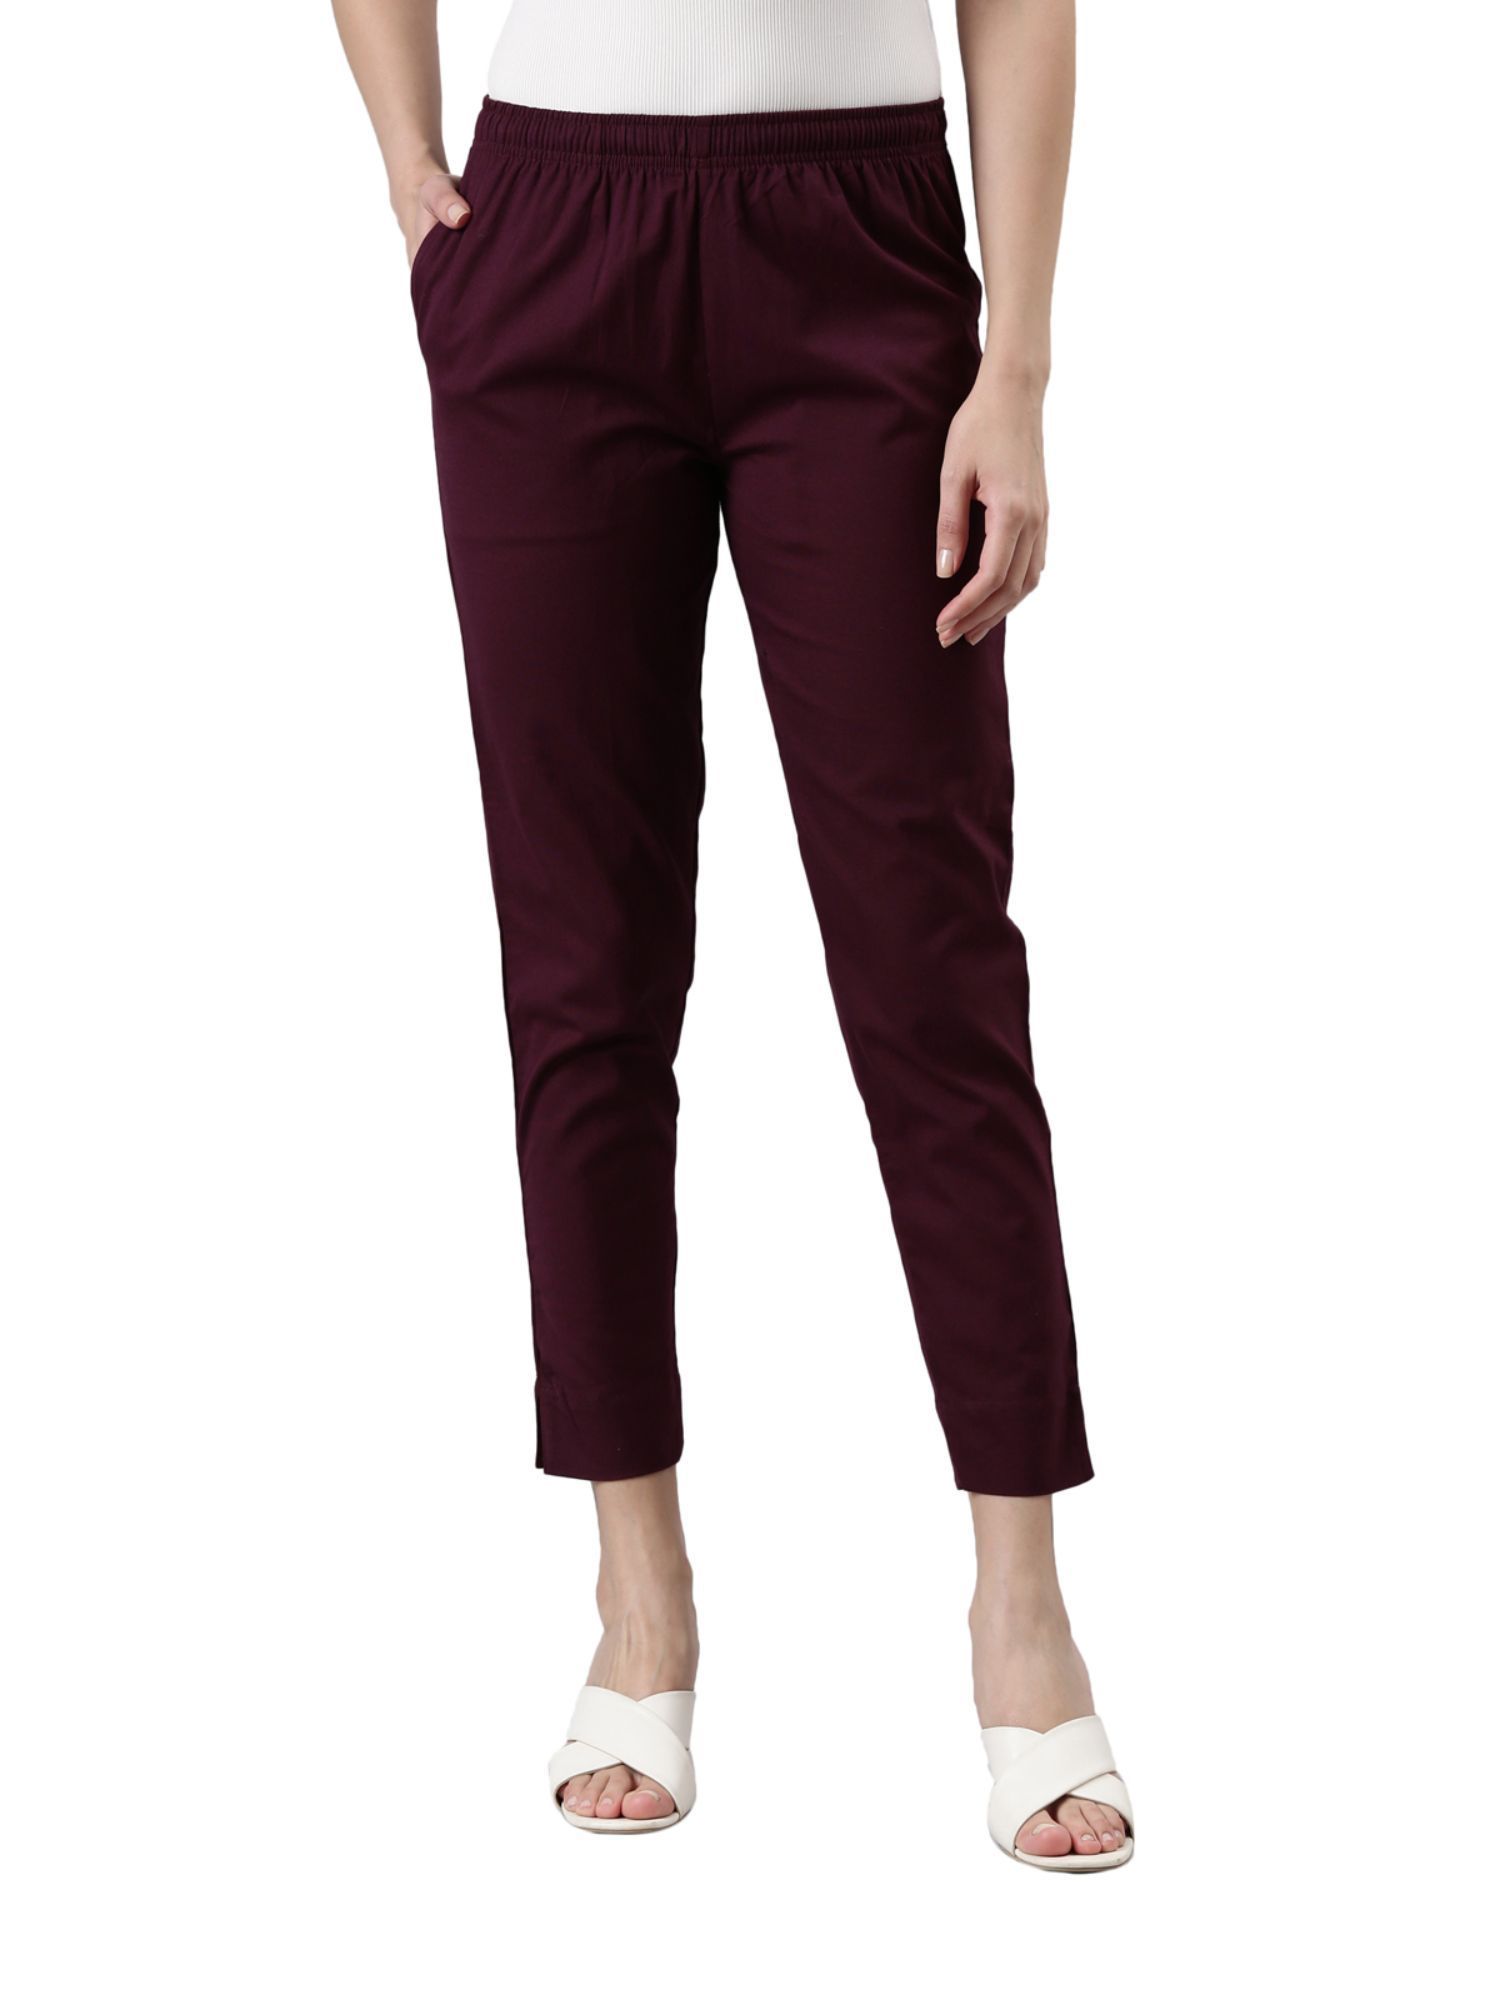 Trousers Pants for Women  Trousers Pant for Women  Western Trousers  Pants for Women 